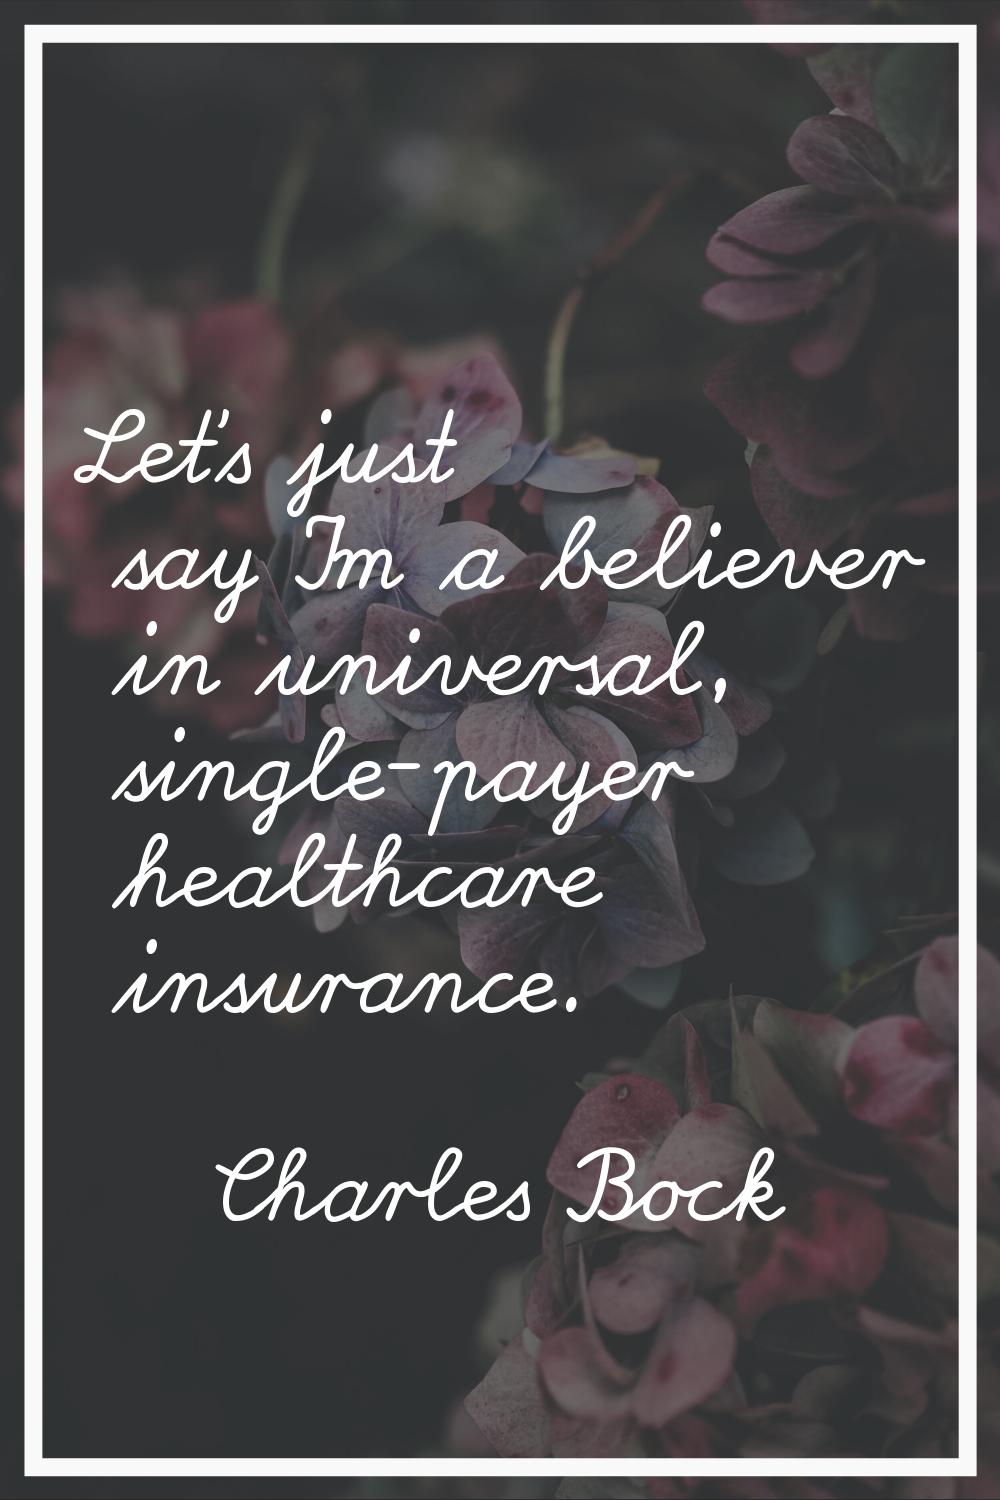 Let's just say I'm a believer in universal, single-payer healthcare insurance.